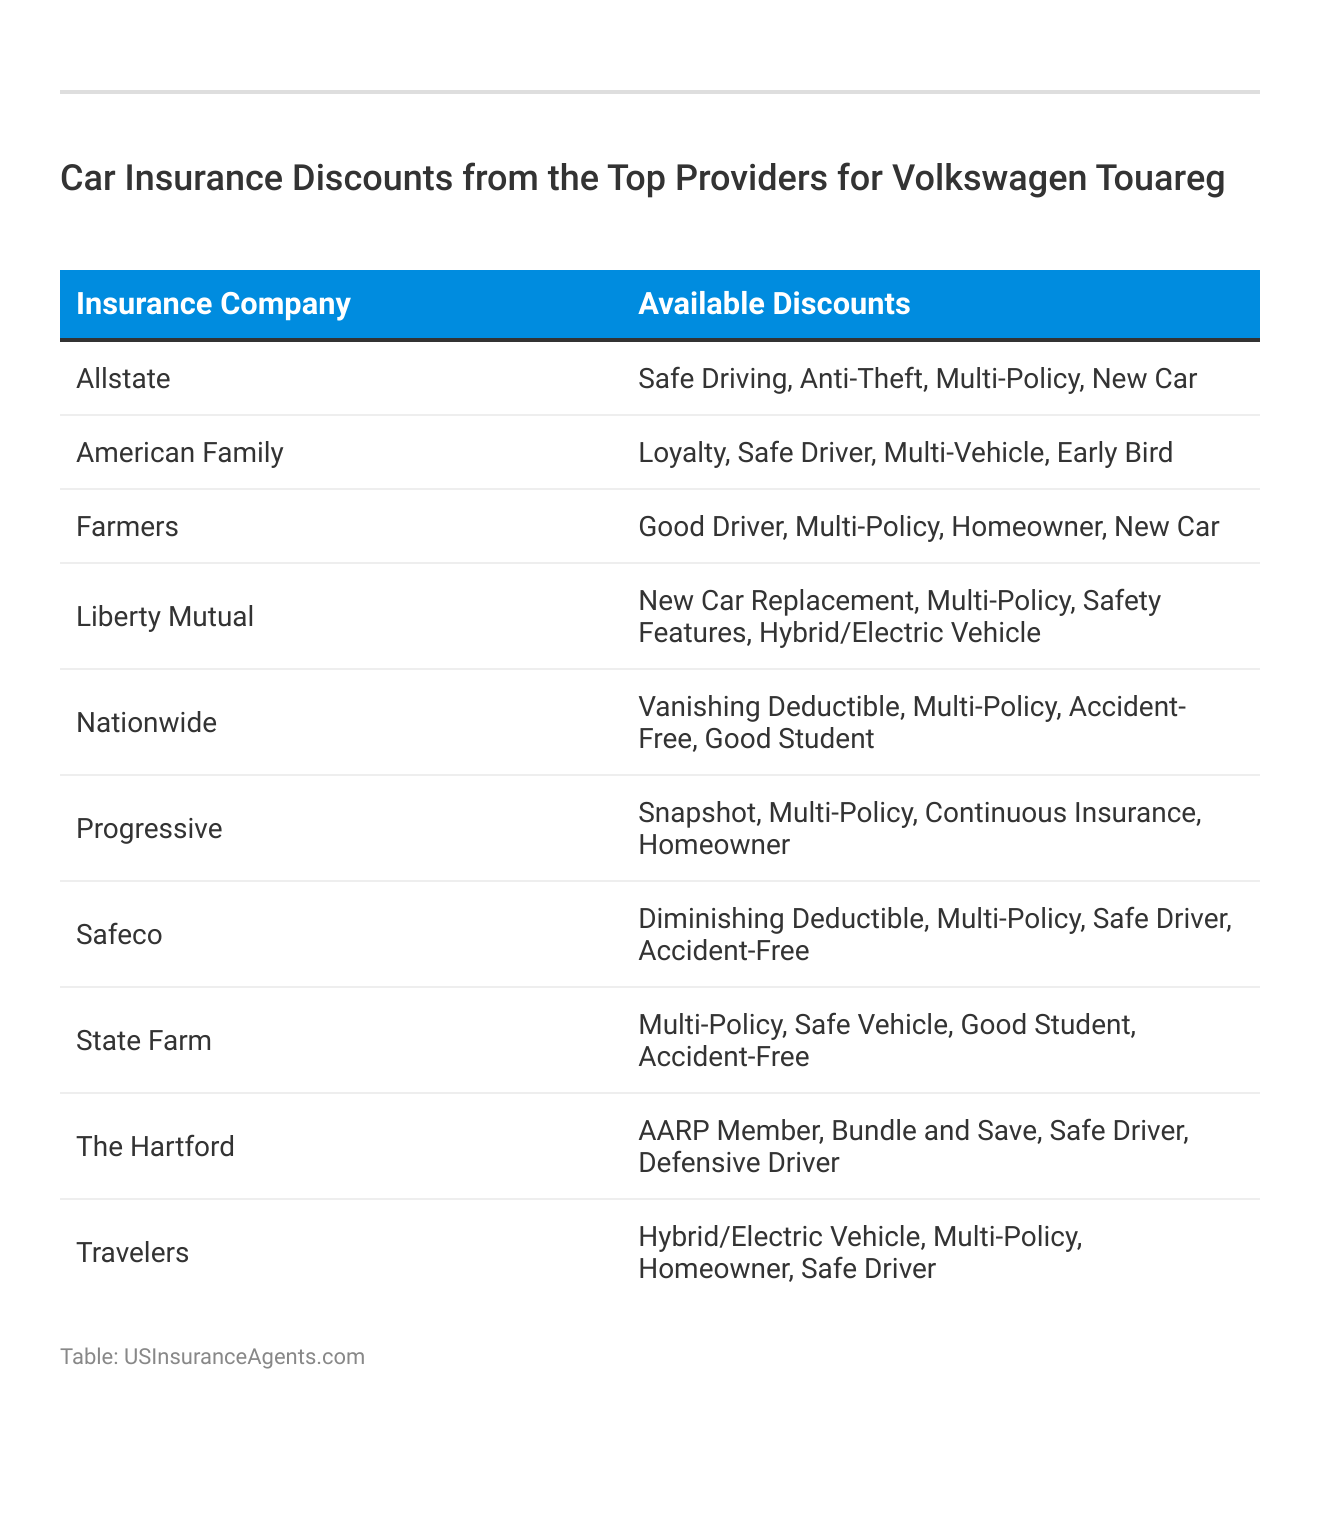 <h3>Car Insurance Discounts from the Top Providers for Volkswagen Touareg</h3>